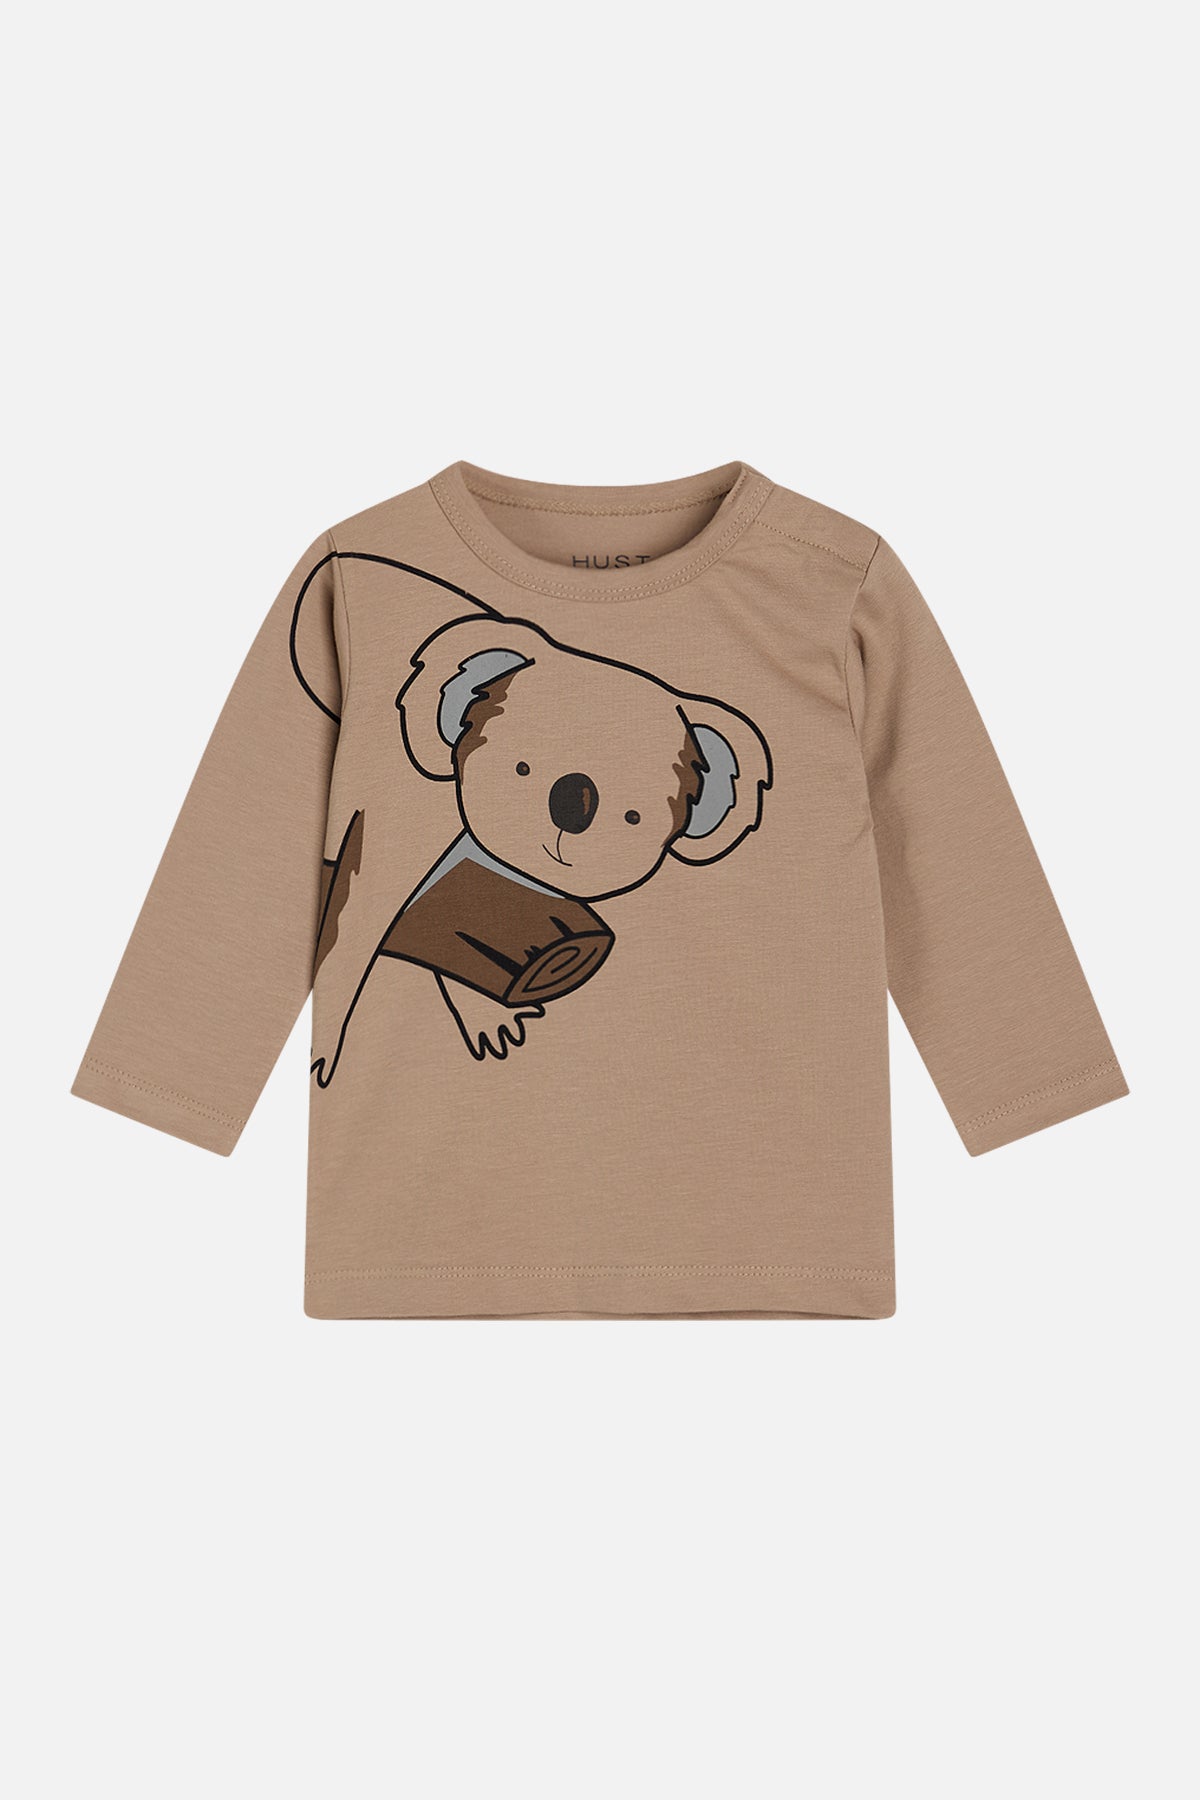 Hust And Claire - August Bluse Koala - Mocha